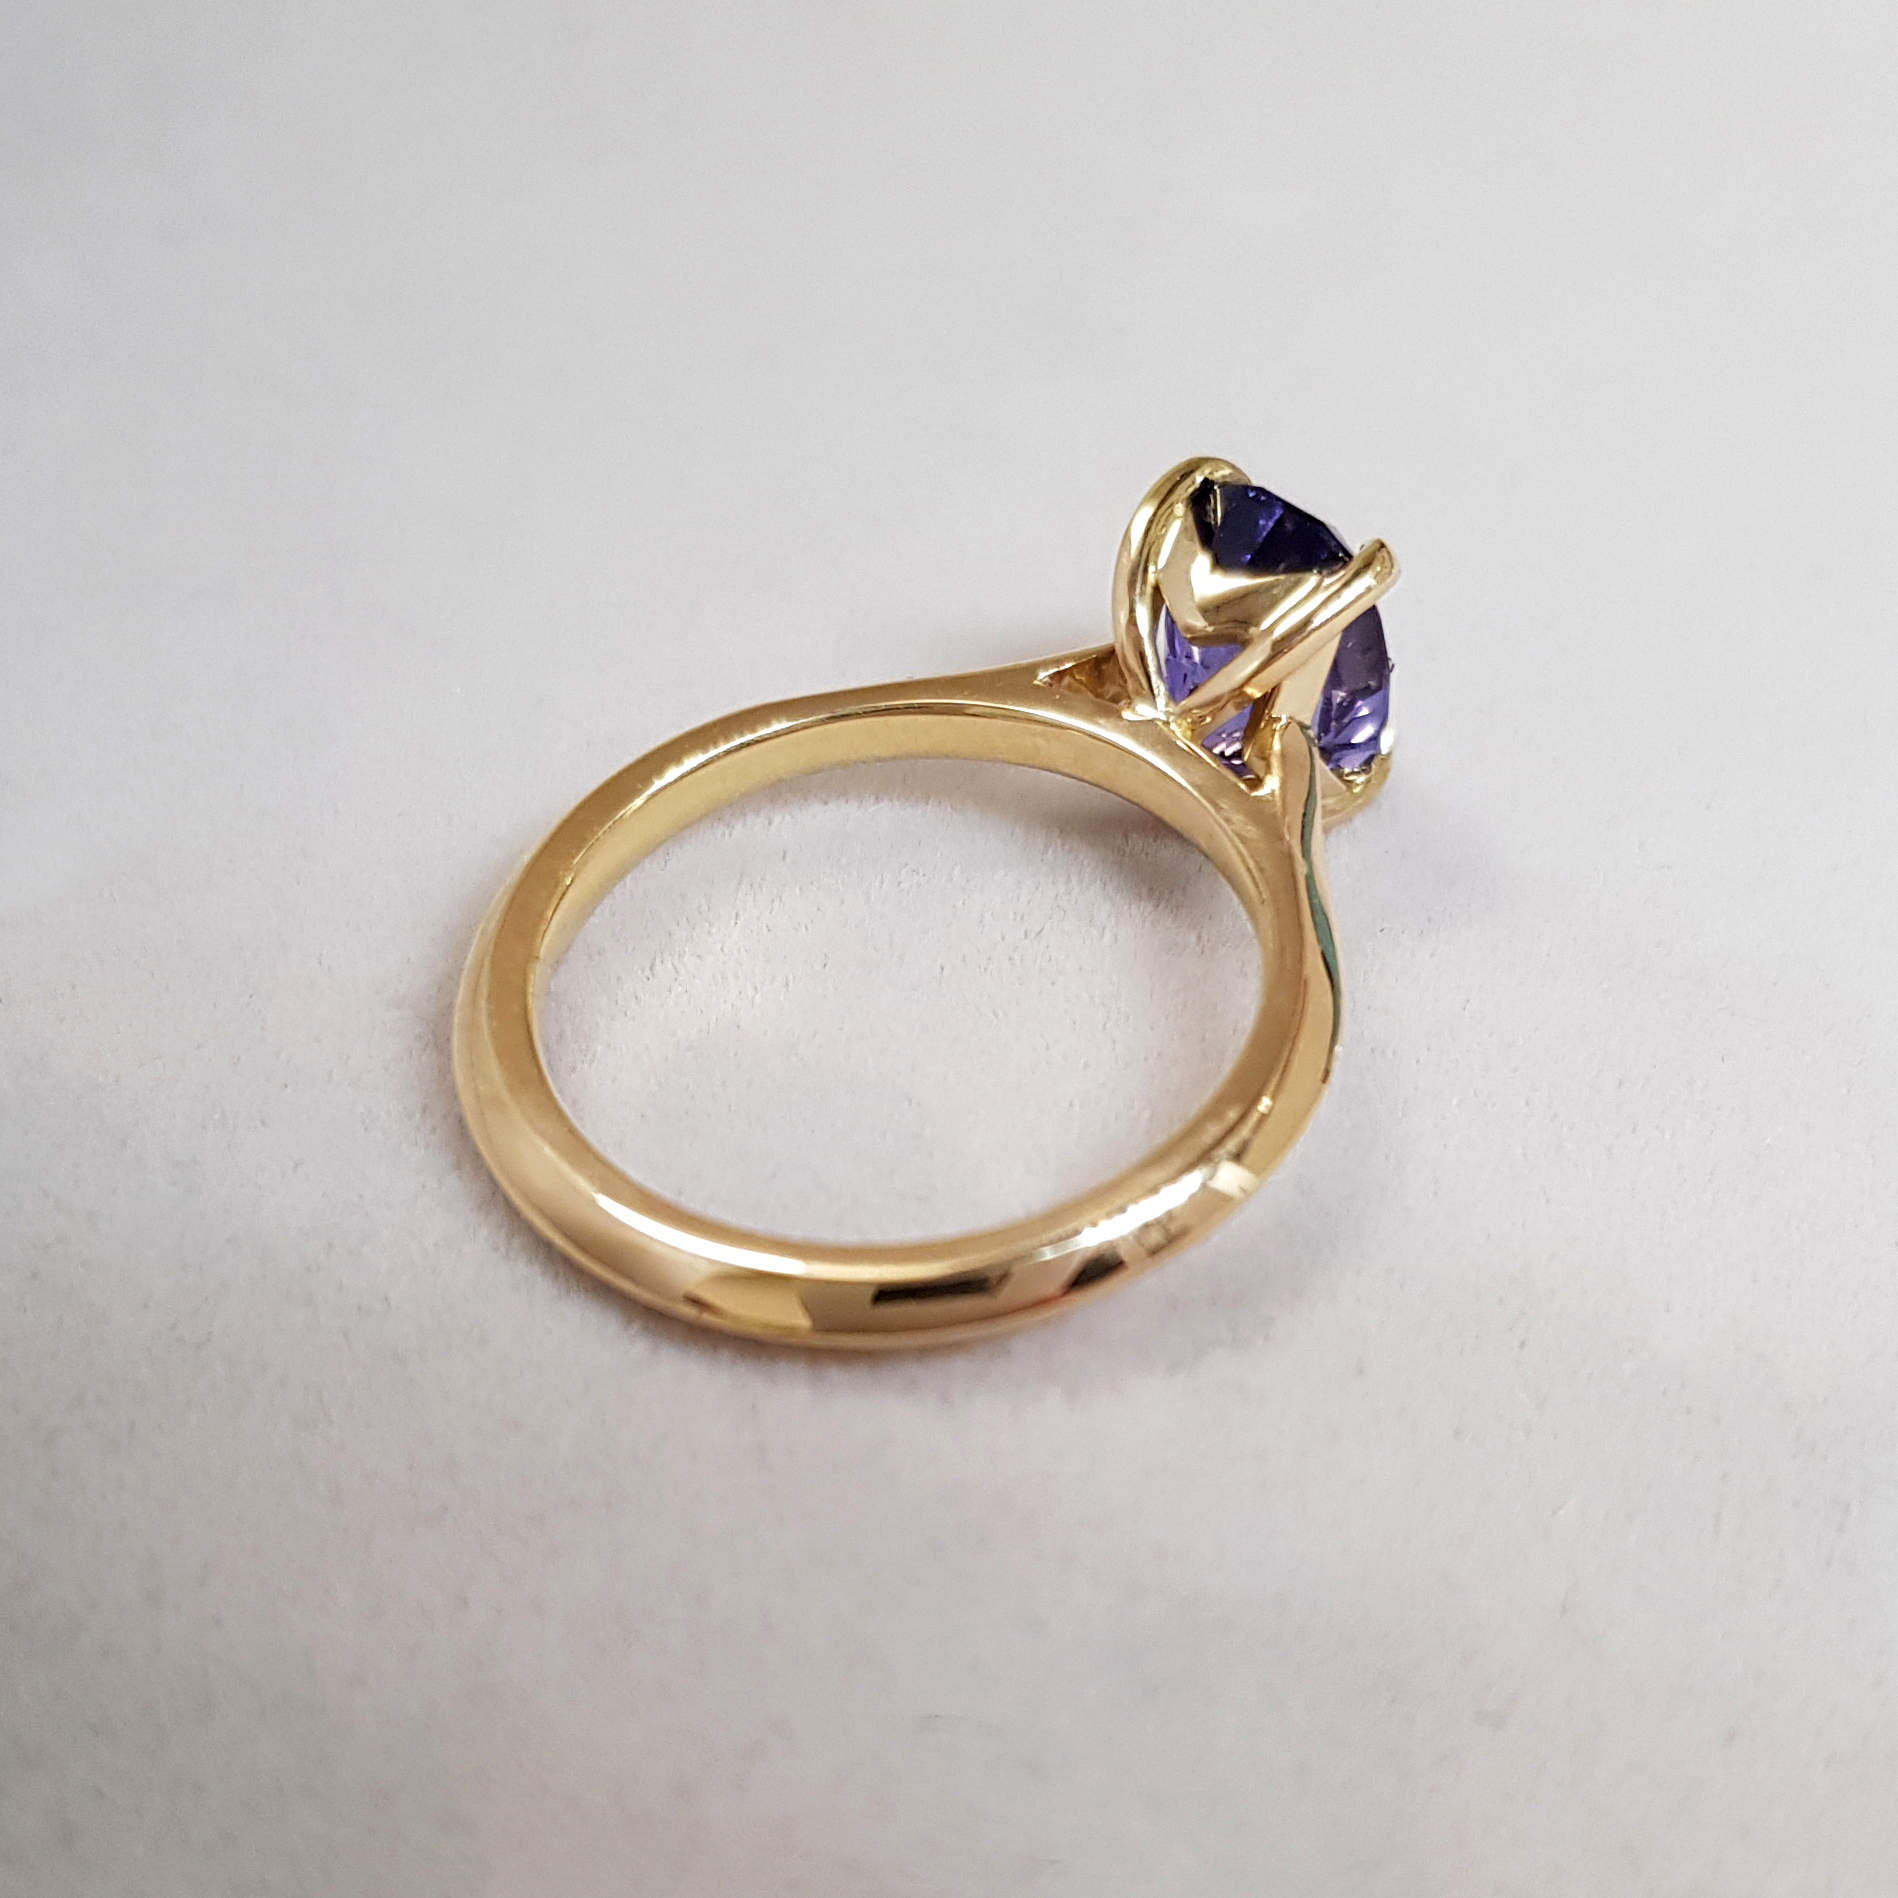 a yellow gold engagement ring, showing the underside of the setting holing a single purple sapphire stone